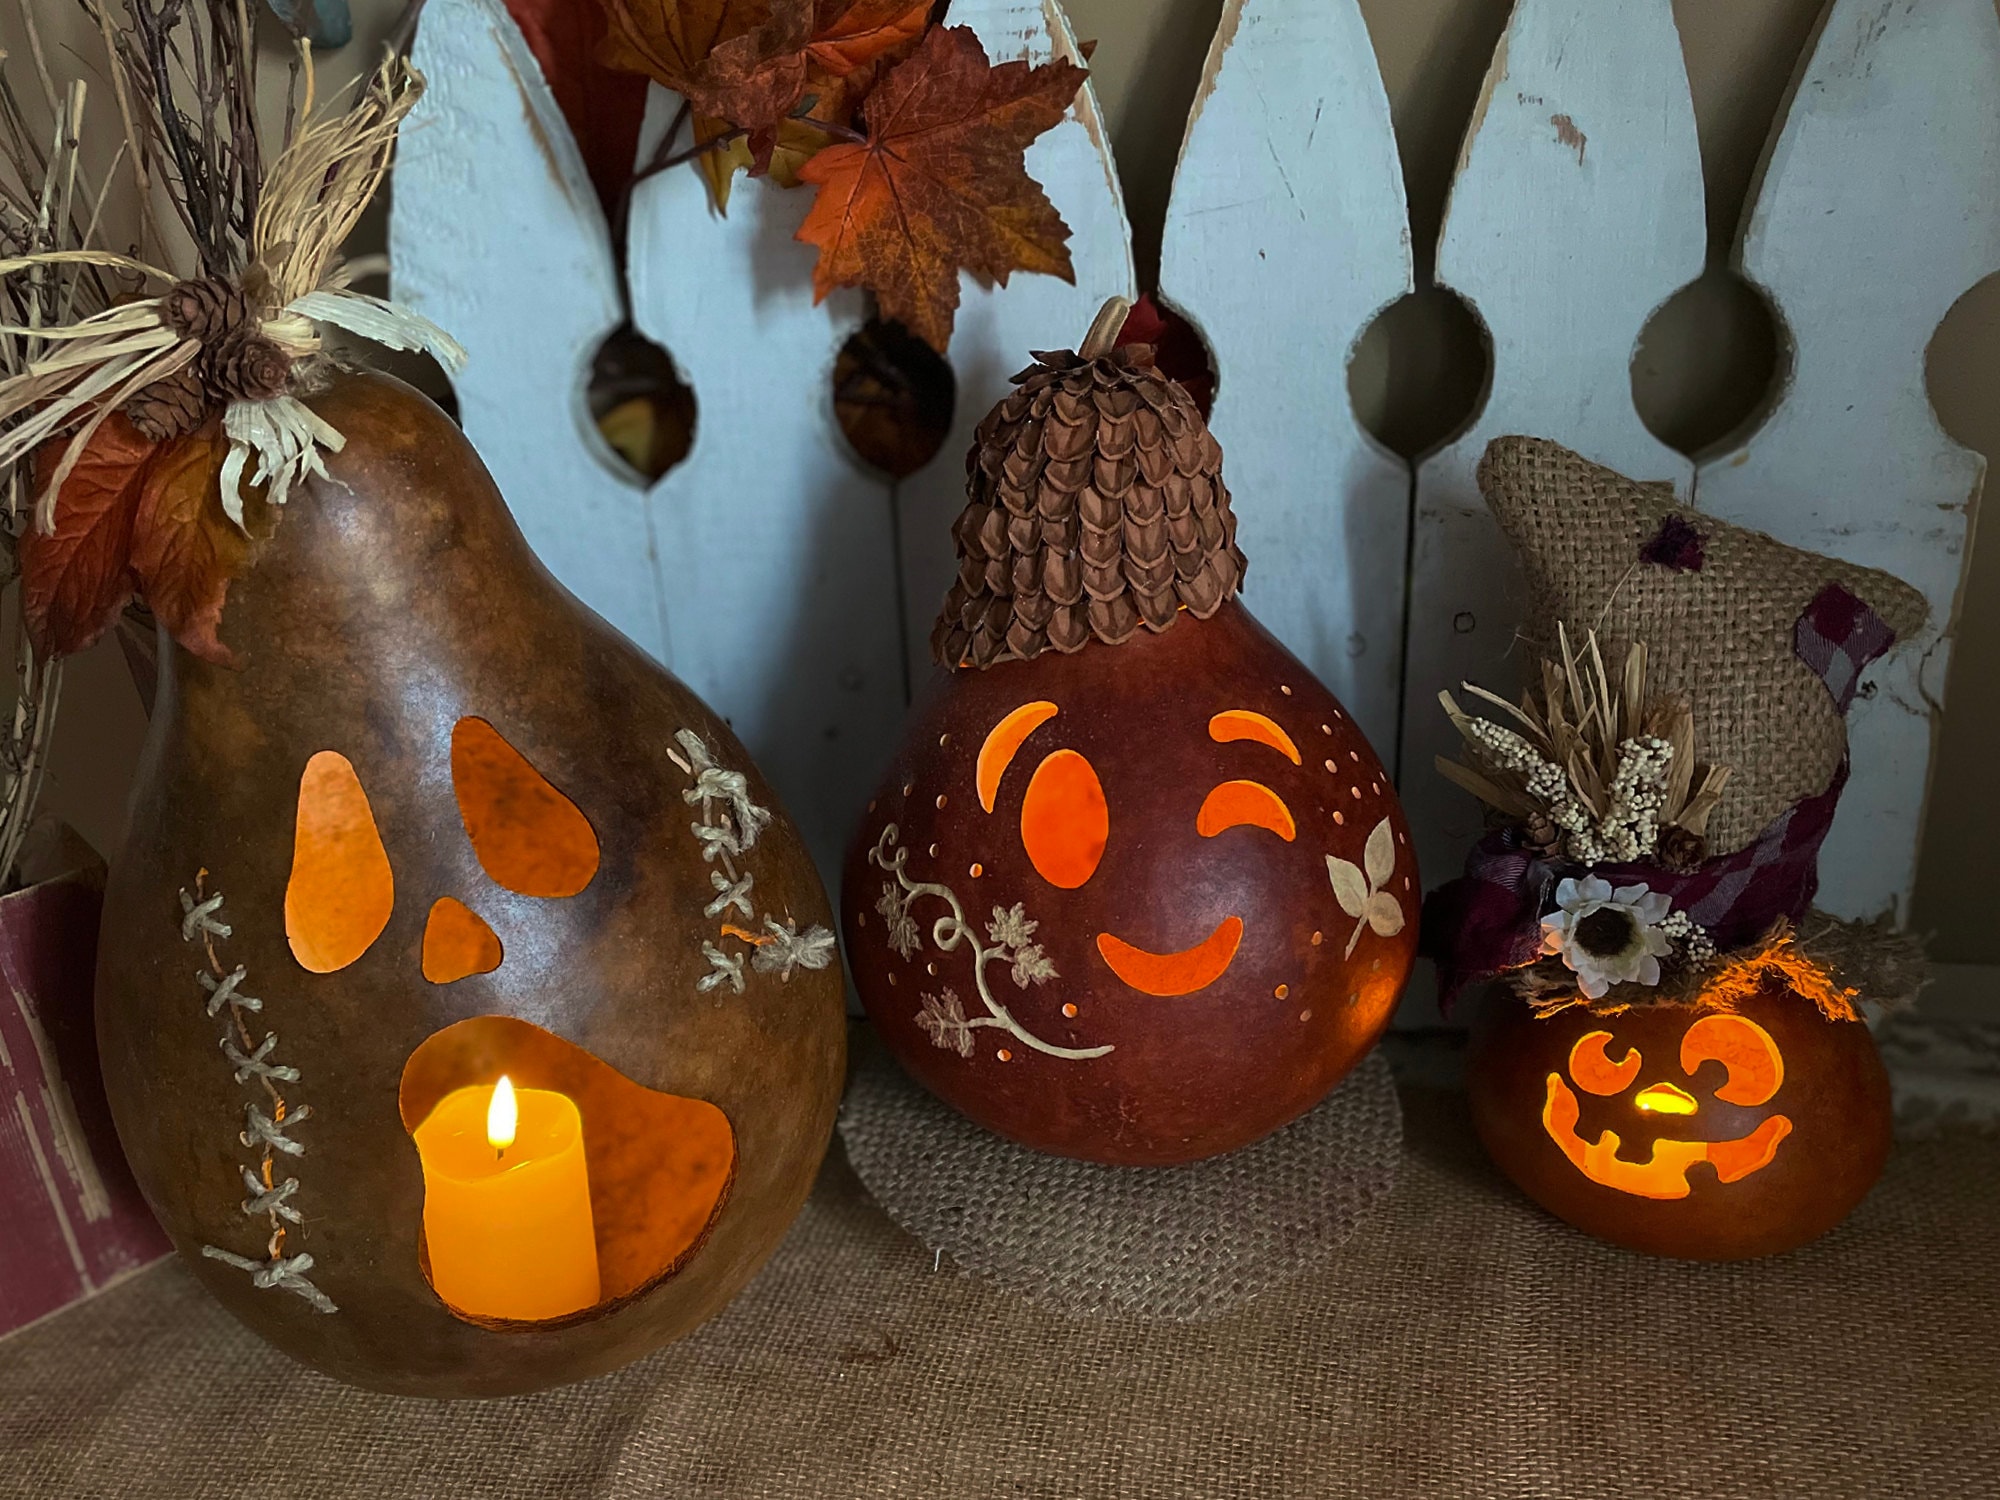 Carved gourds for fall pumpkin decorations.